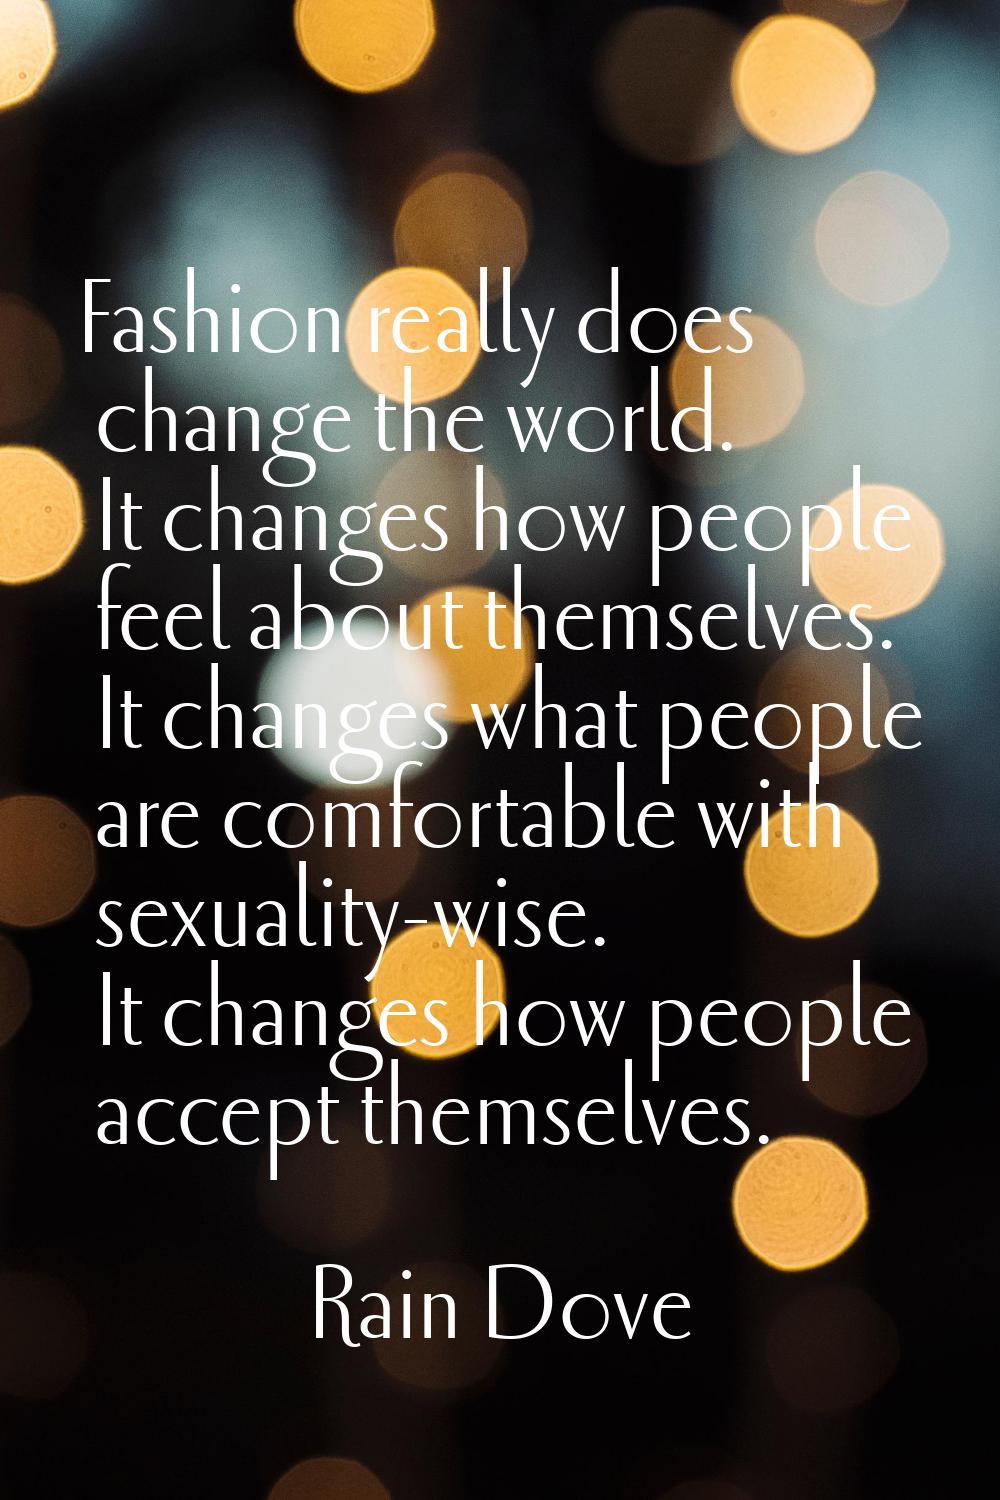 Fashion really does change the world. It changes how people feel about themselves. It changes what 